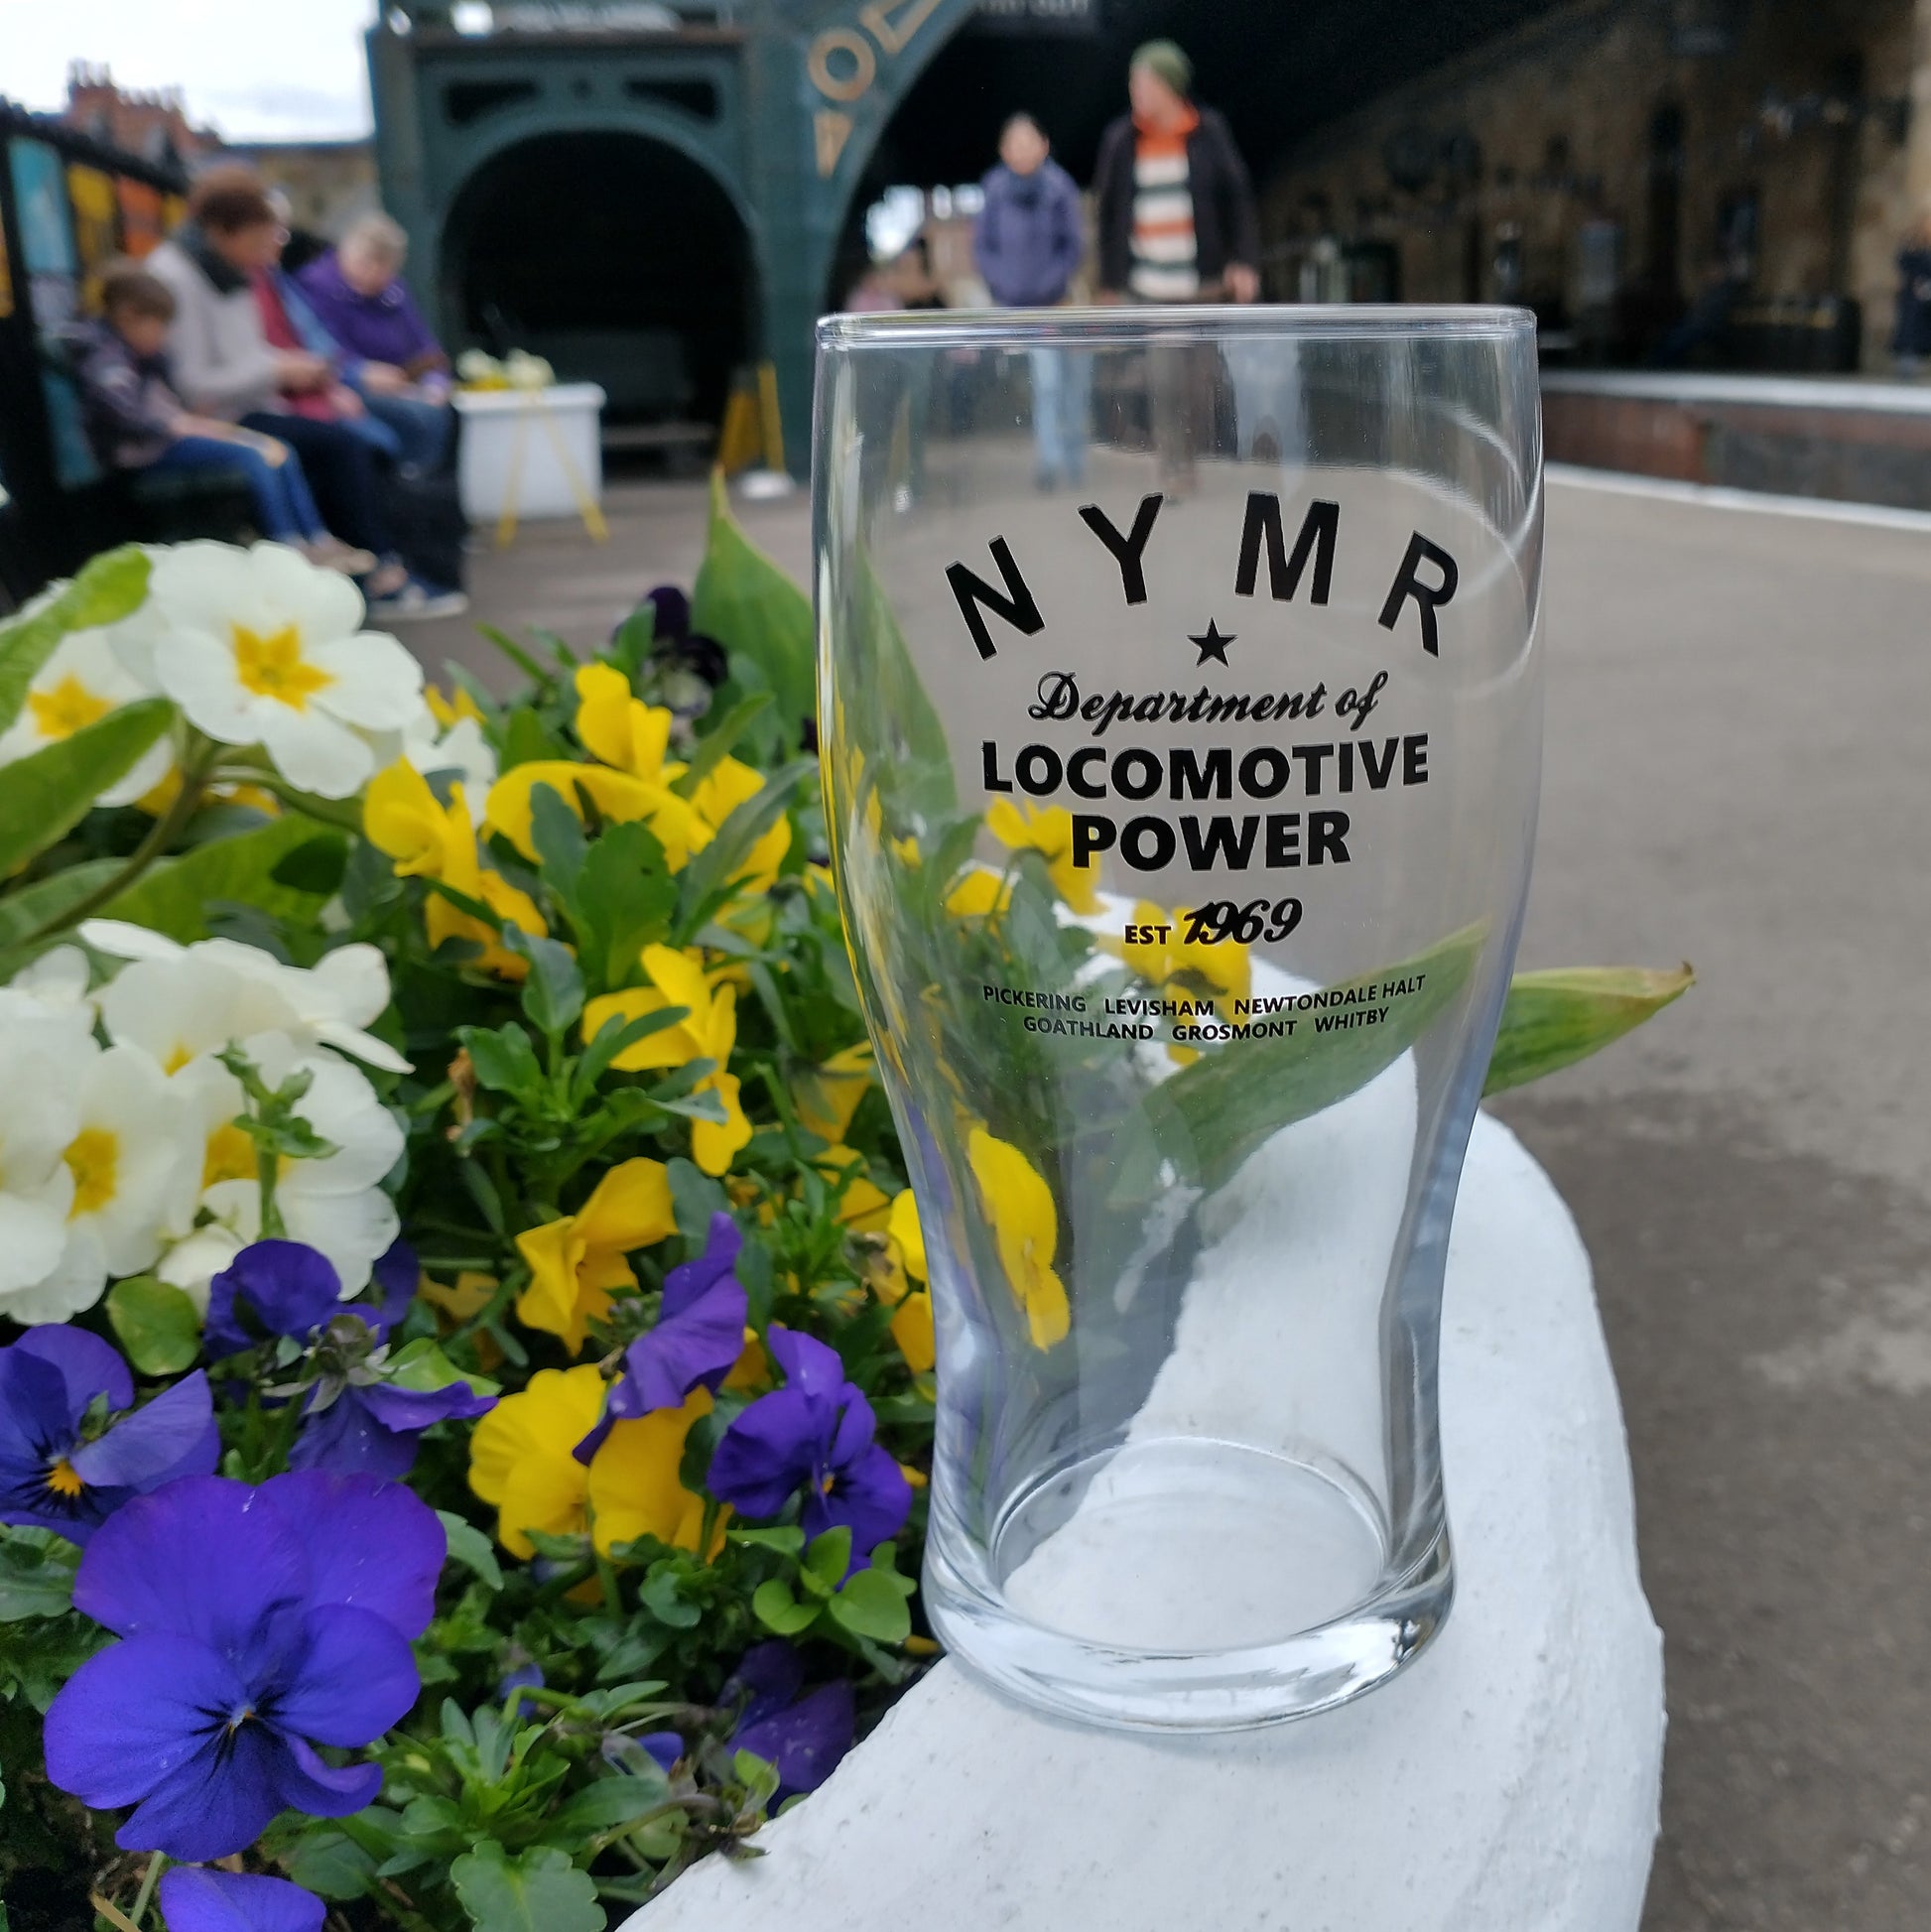 Tulip shaped pint glass with black N Y M R Locomotive Power logo and list of stations.